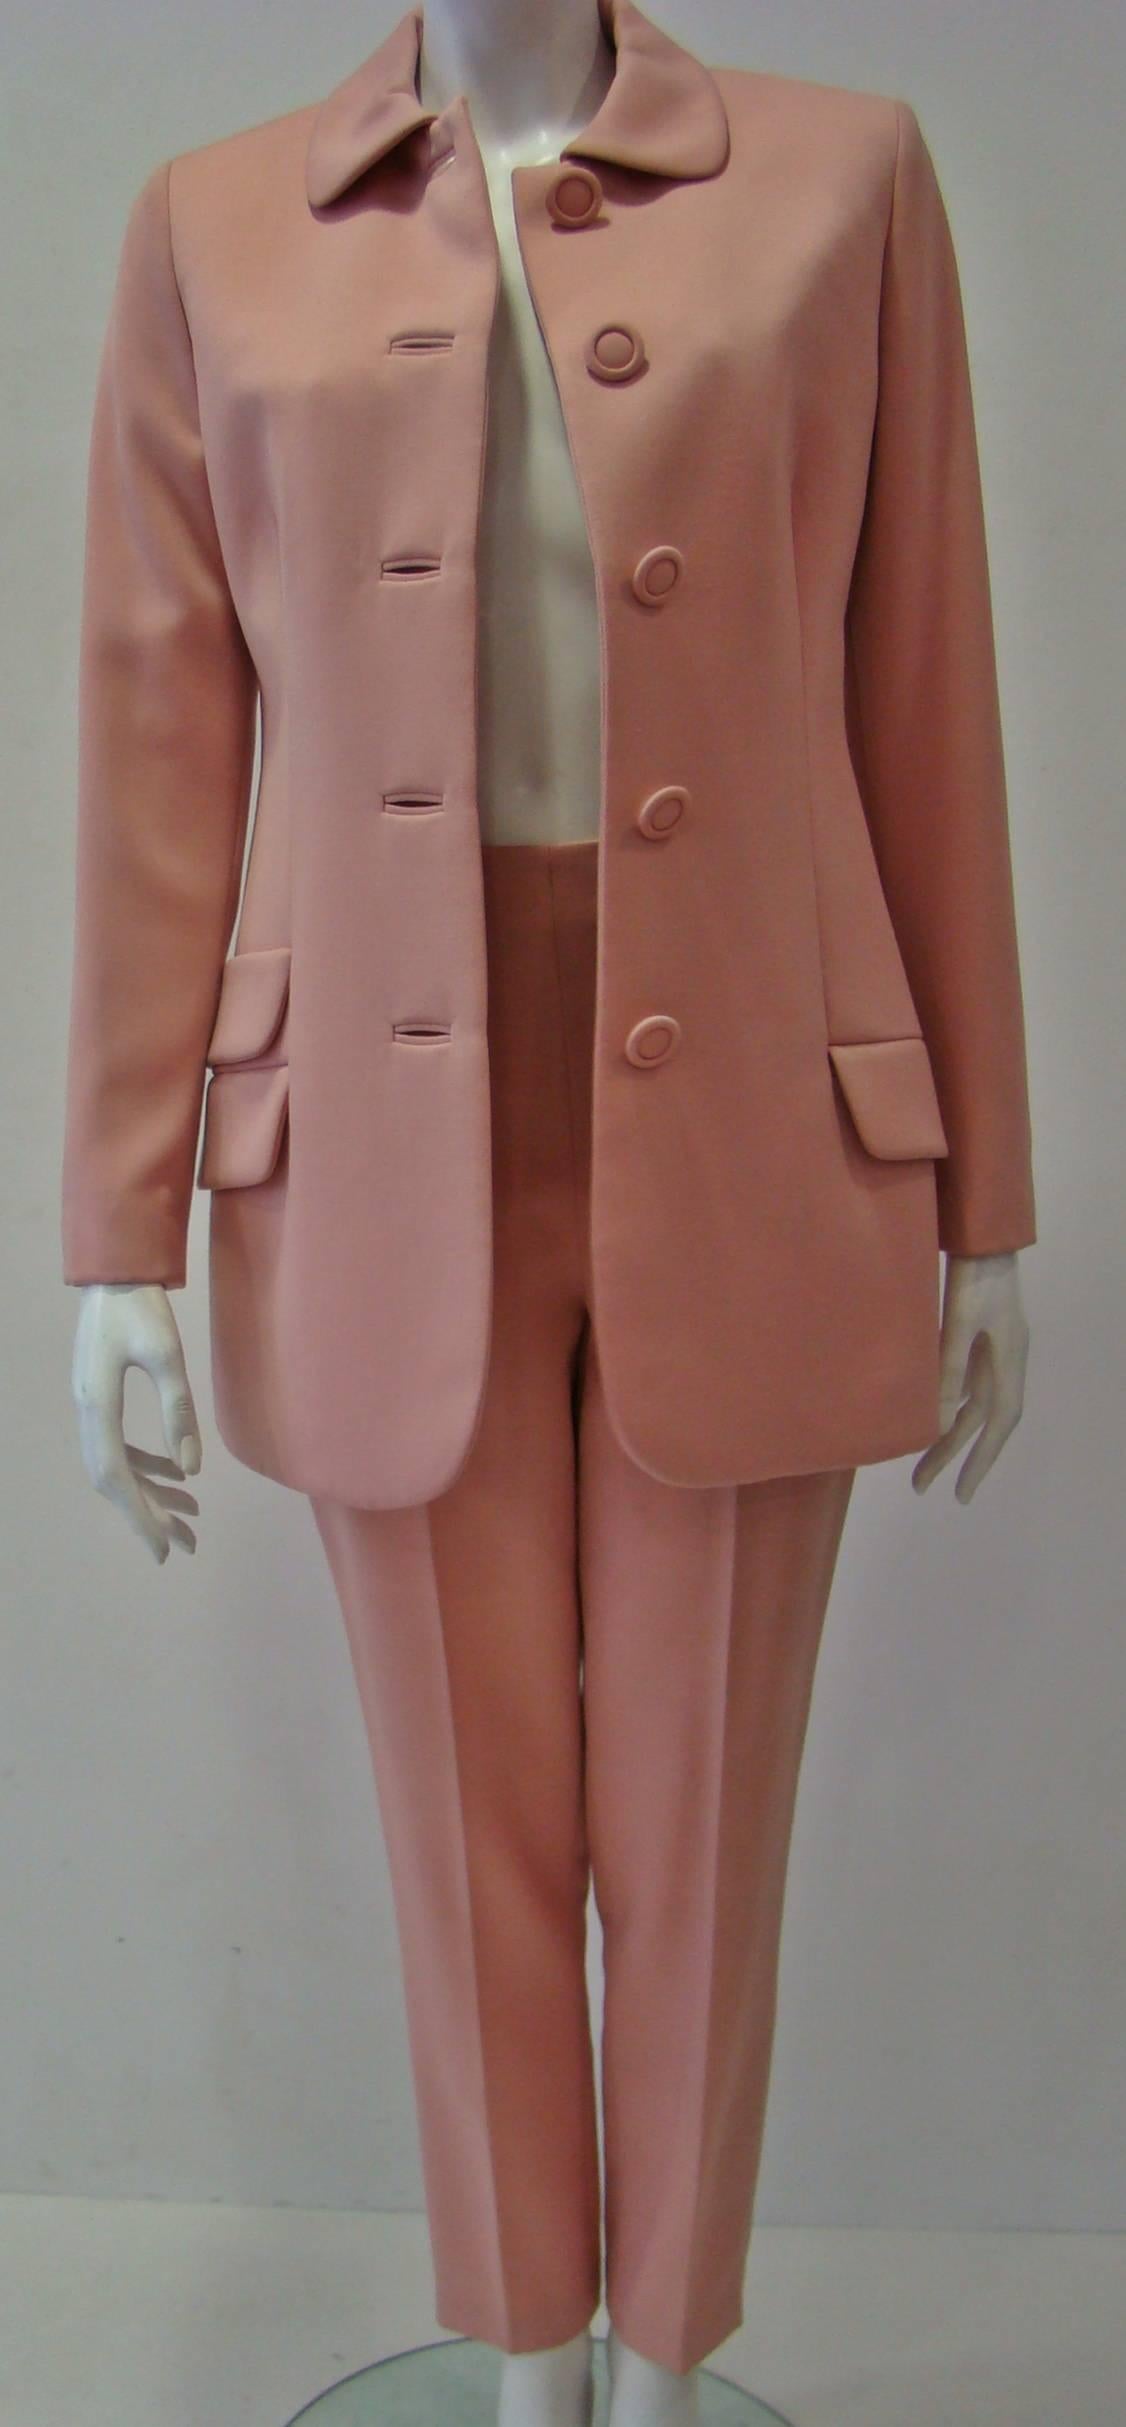 Gianni Versace Couture Salmon Pants Suit For Sale 1